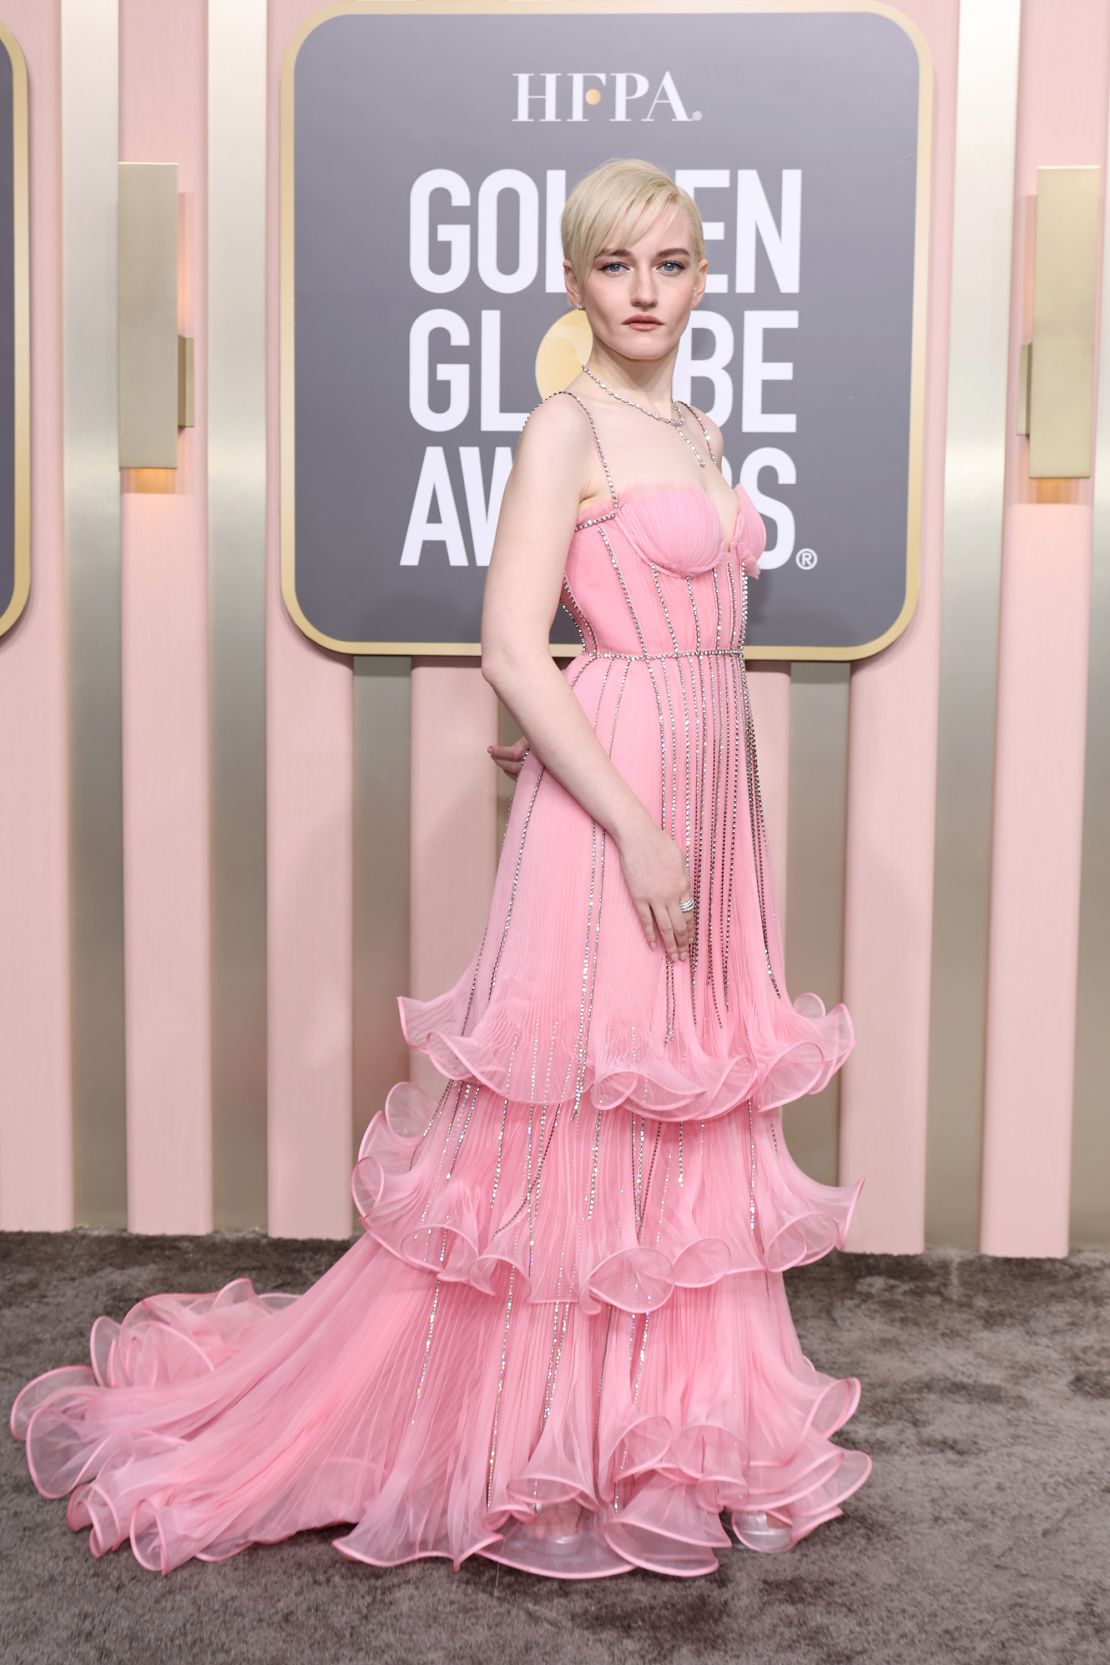 Double nominee Julia Garner in a three-tiered Gucci gown and jewelry by De Beers.